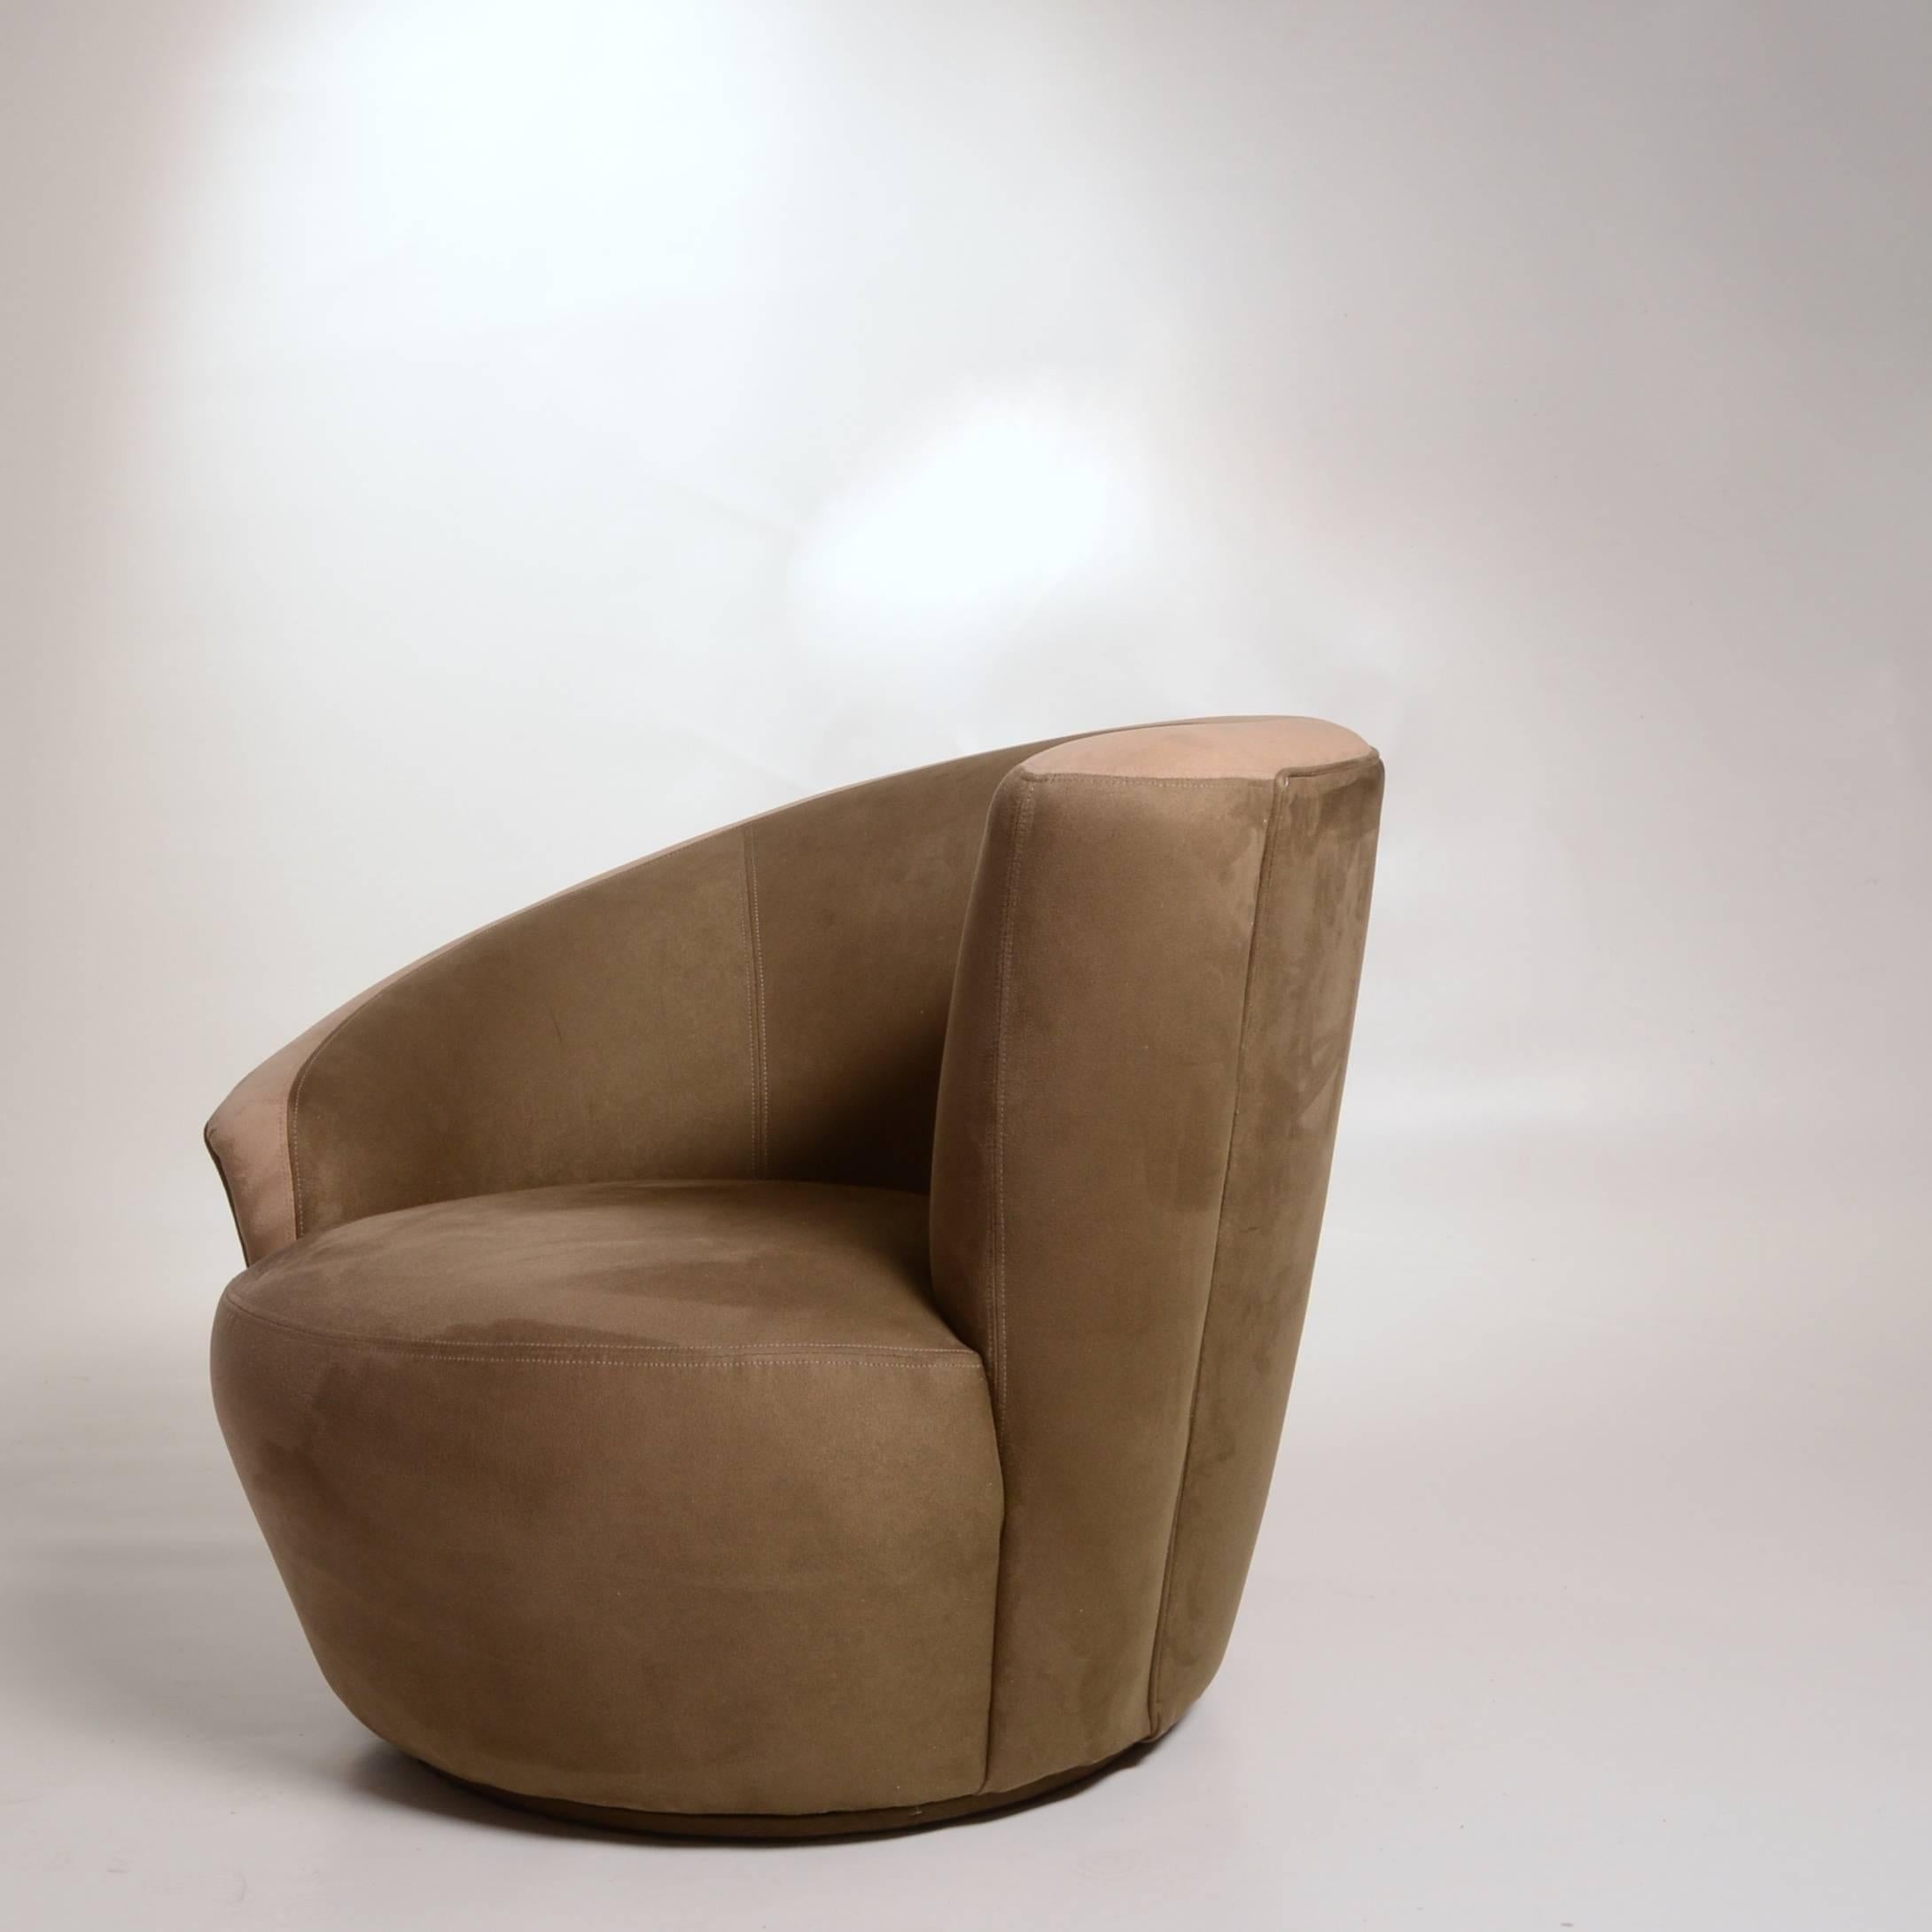 Kagan's Nautilus chair exemplifies his use of sculpture and asymmetry in contemporary furniture design. T.